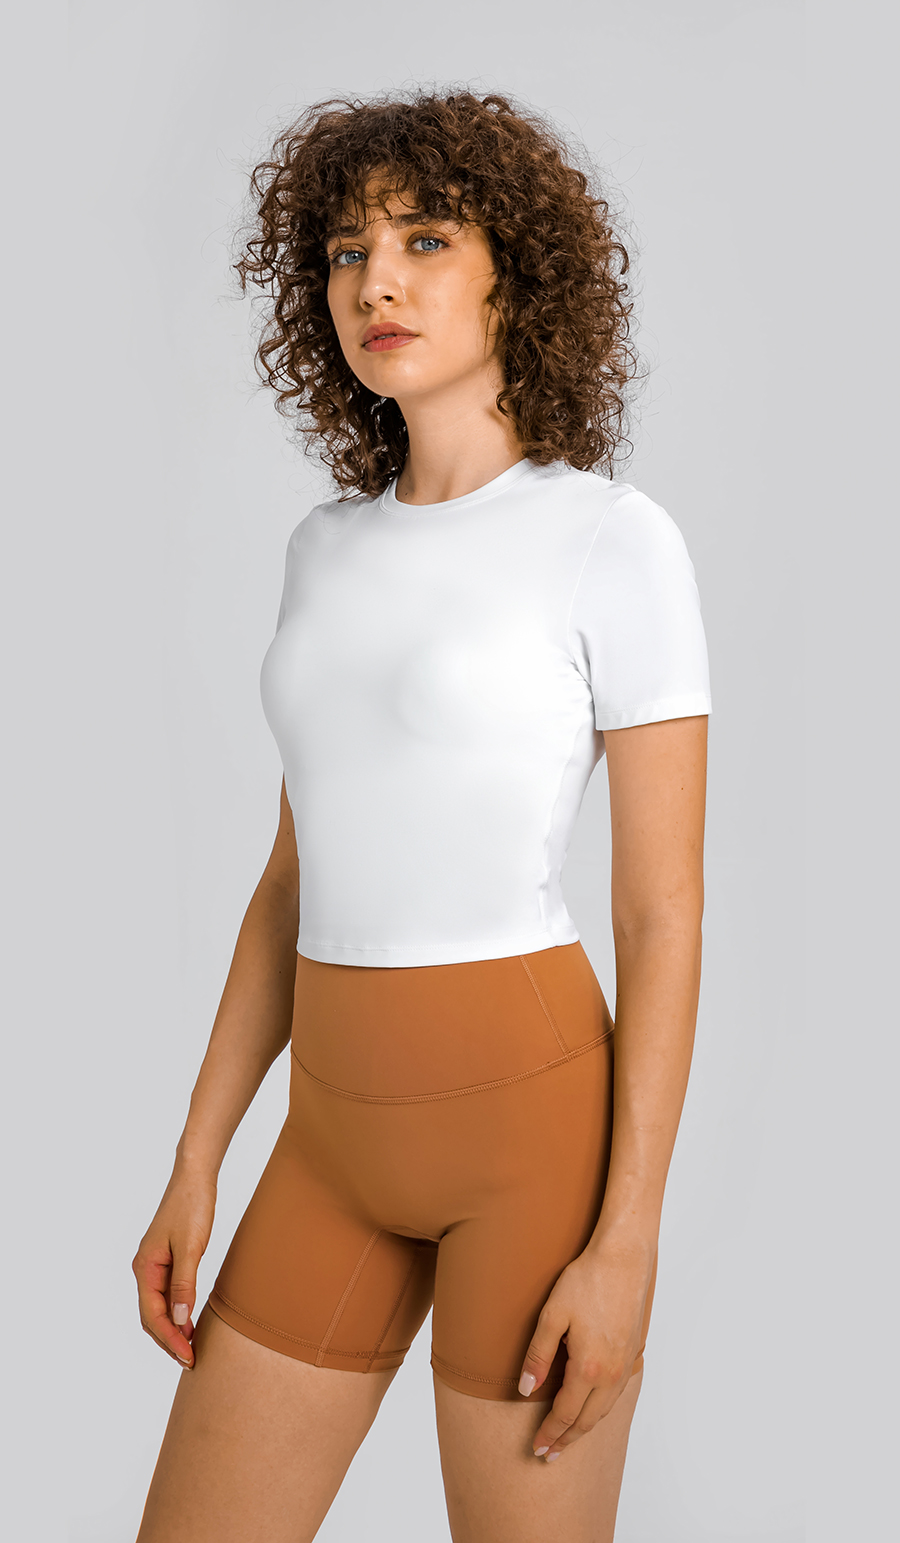 Hergymclothing white cropped short sleeve top high quality and comfortable for sports and exercise